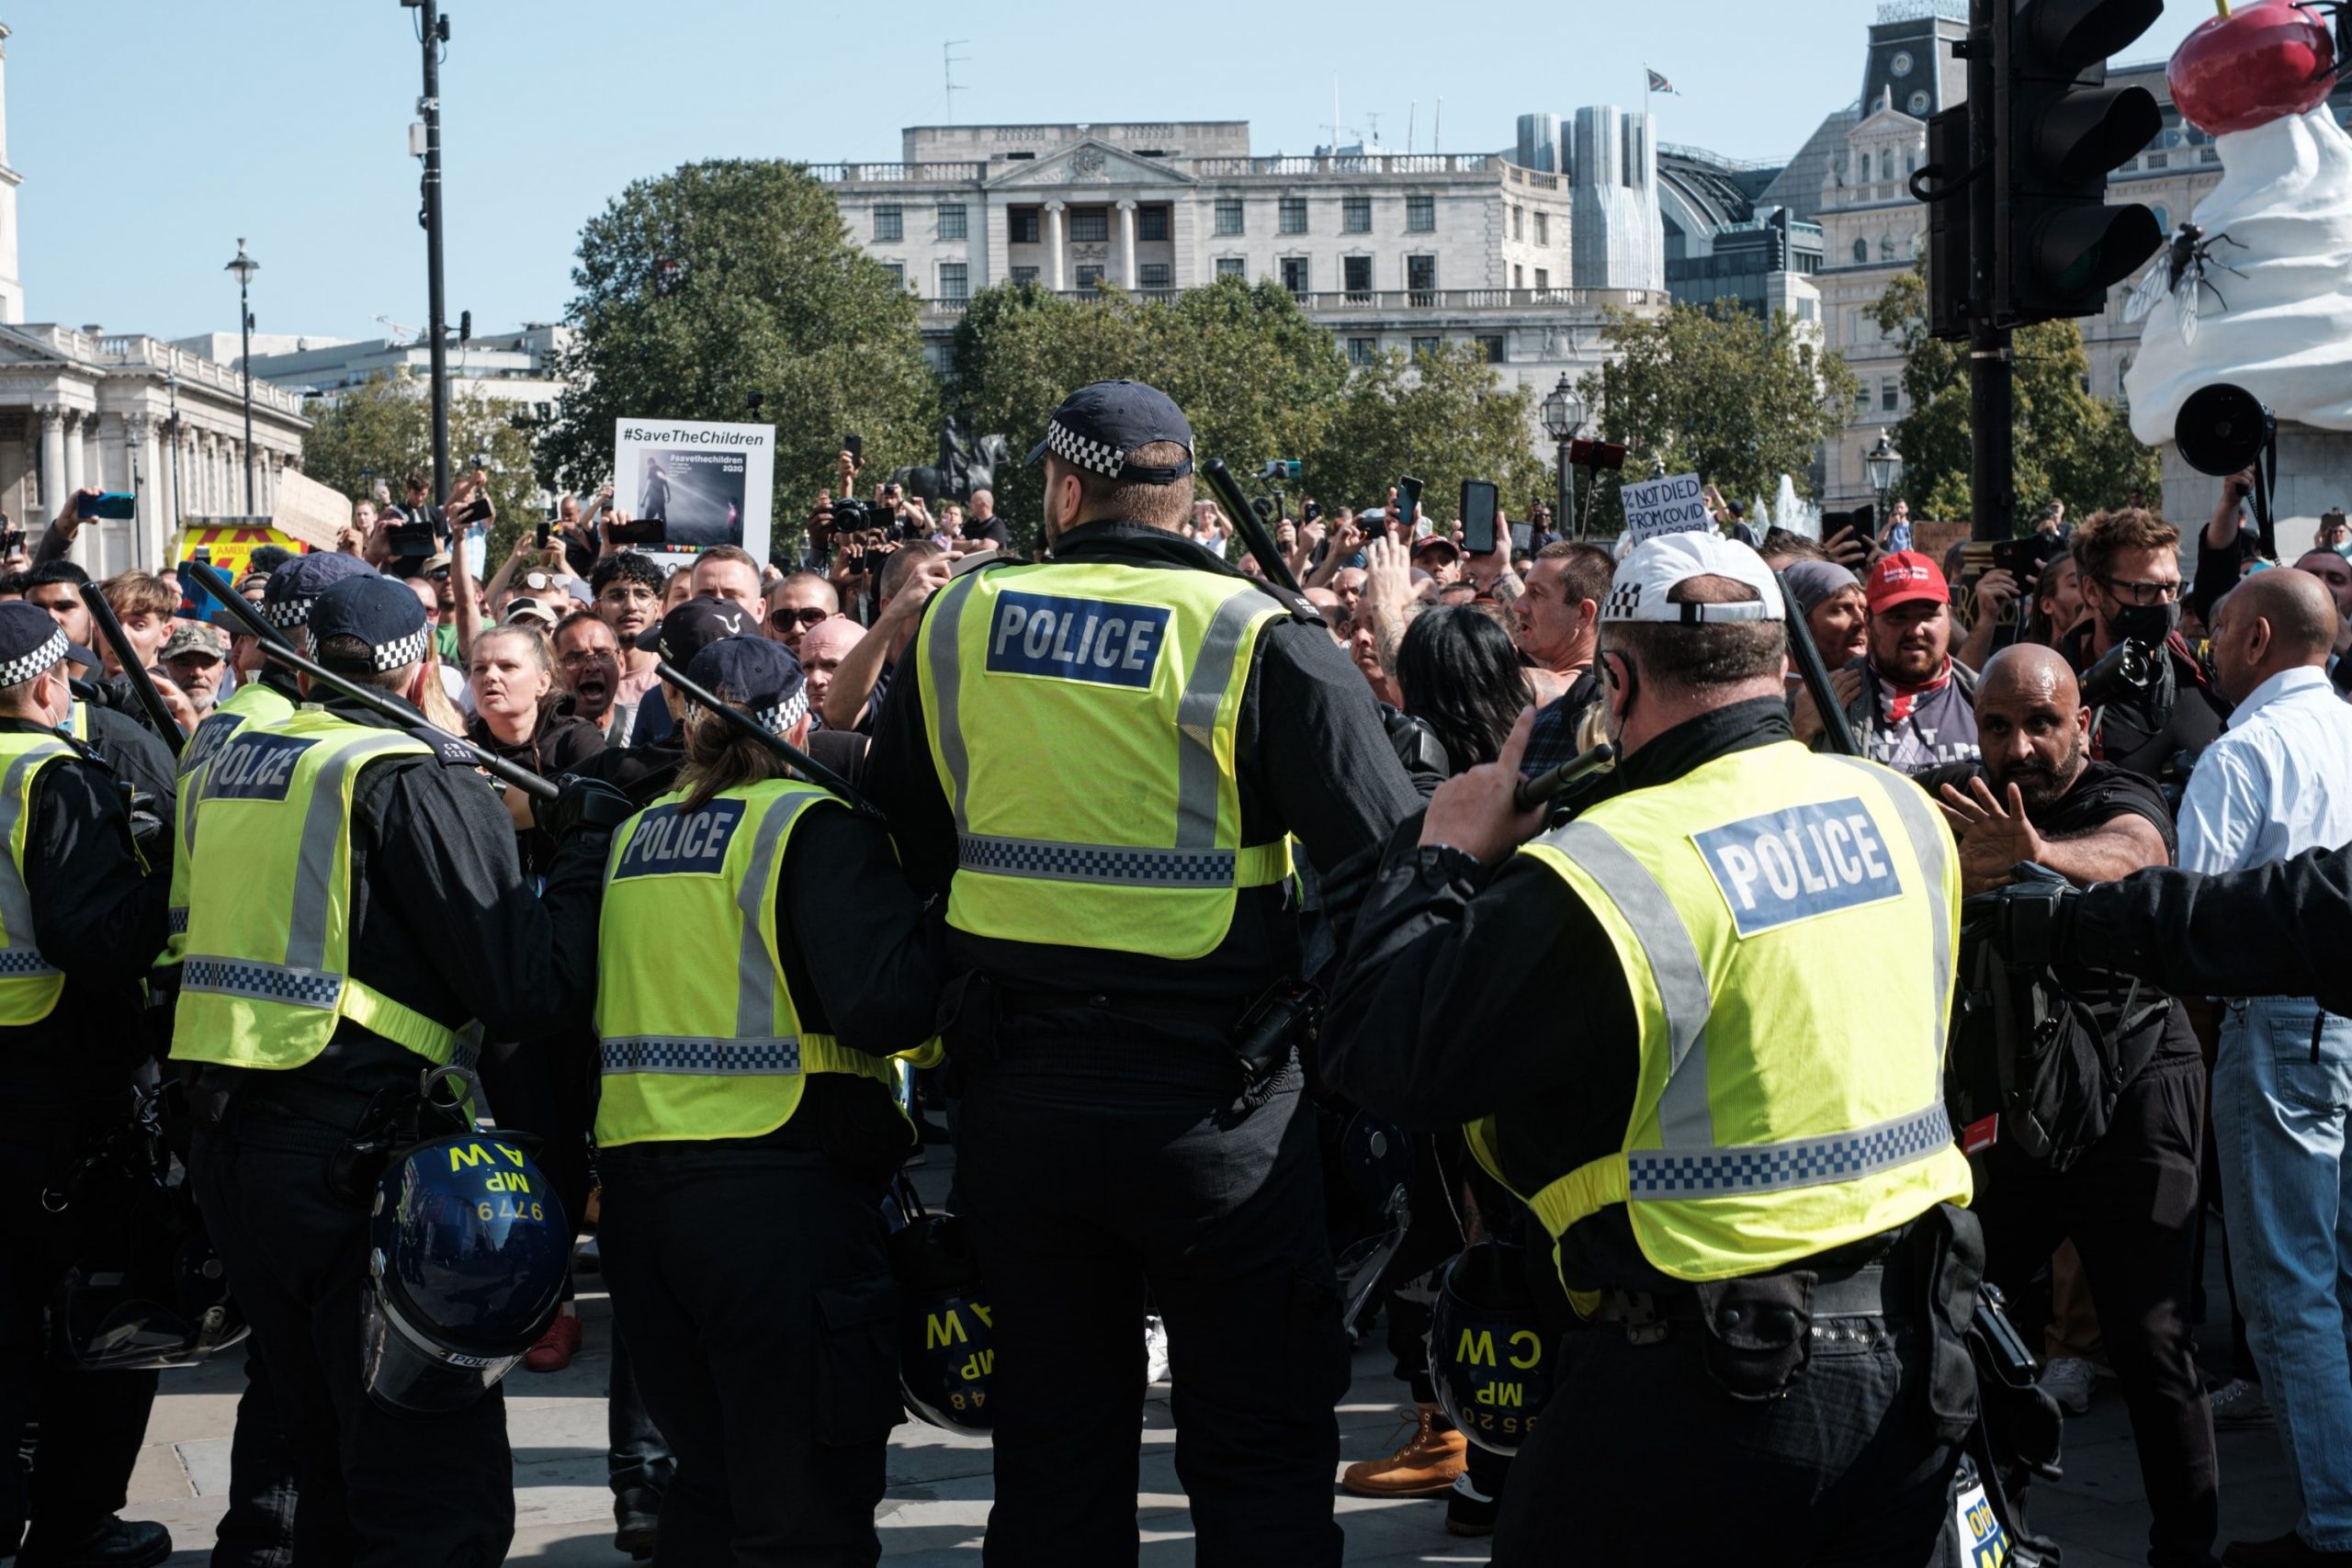 33 arrested by police in UK after anti-lockdown protests